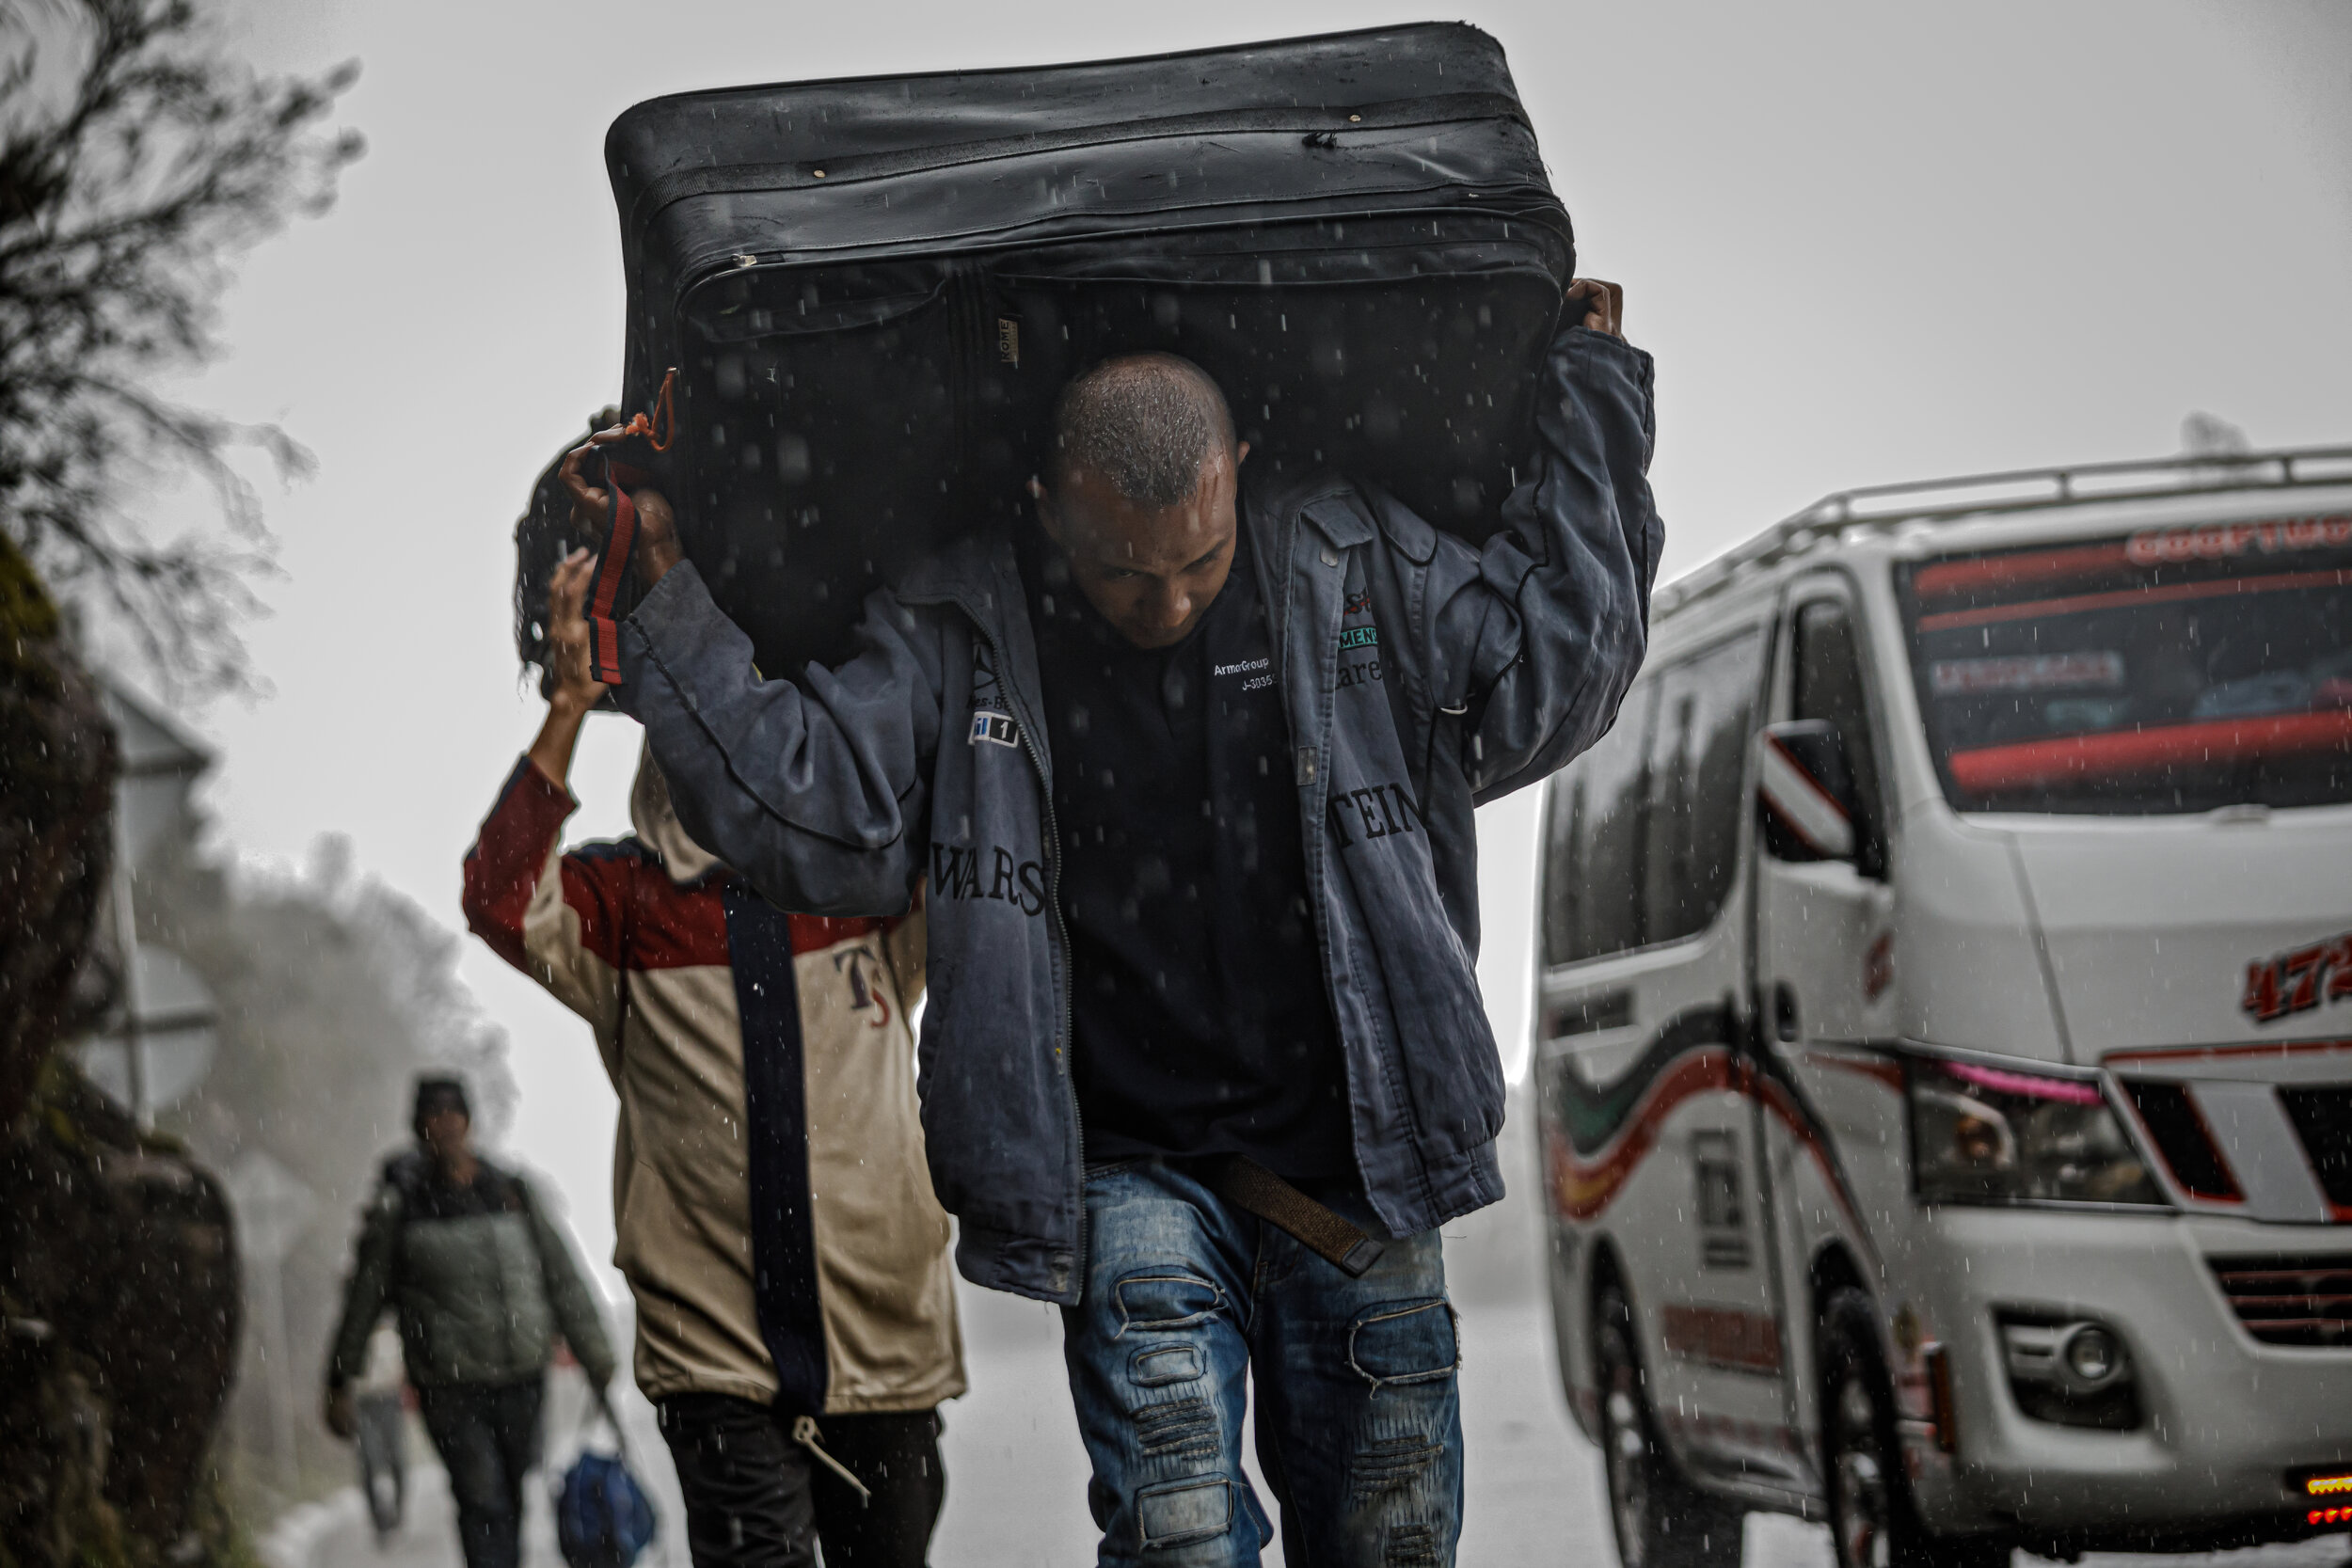  Through the rain and cold and carrying their worldly possessions - Venezuelans migrants walk the perilous journey through the cold plateau, known as El Pramo de Berln the most dangerous part of the Andes to get to the other side, towards Bucaraman